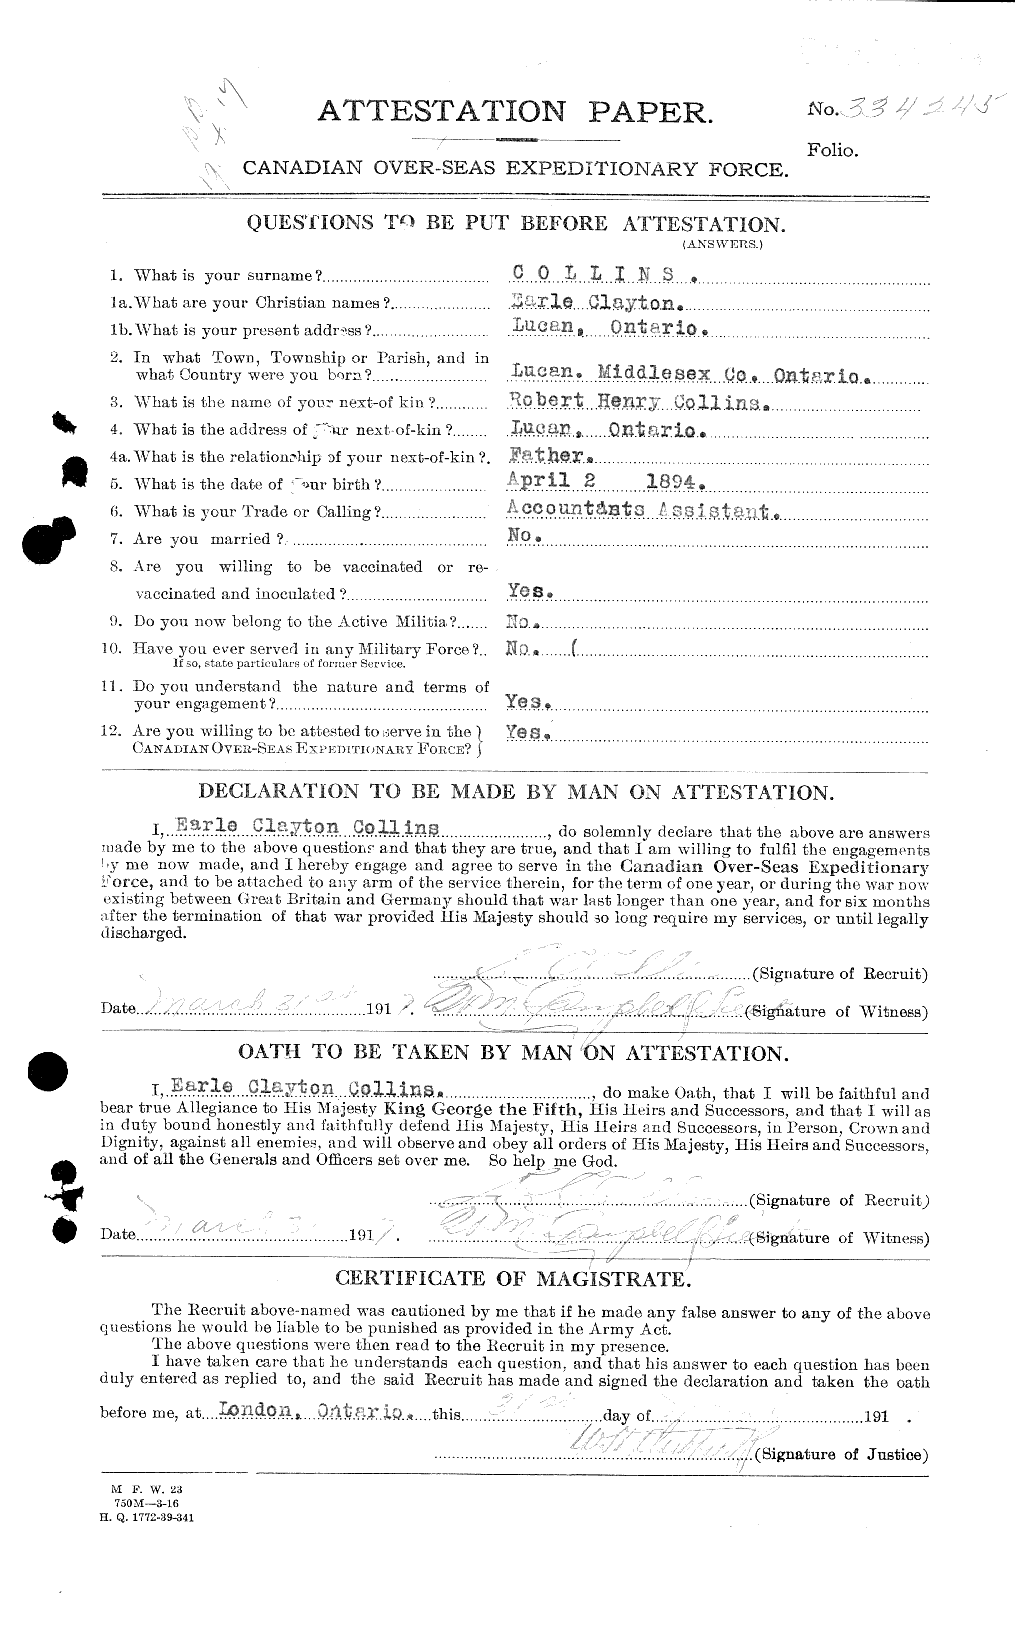 Personnel Records of the First World War - CEF 037729a